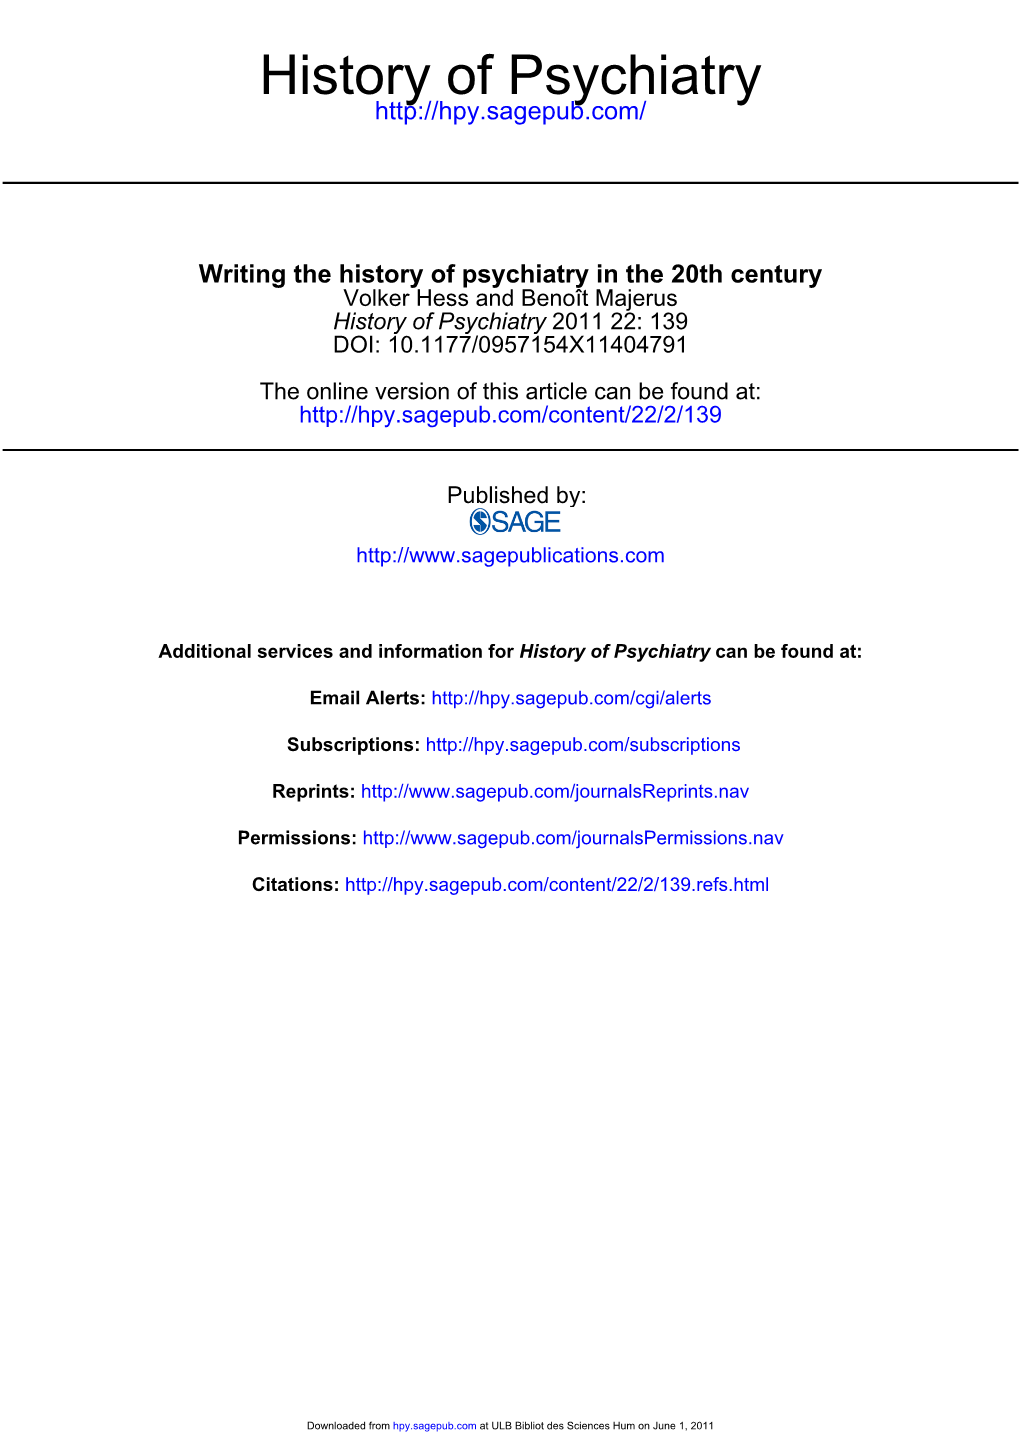 Writing the History of Psychiatry in the 20Th Century Volker Hess and Benoît Majerus History of Psychiatry 2011 22: 139 DOI: 10.1177/0957154X11404791